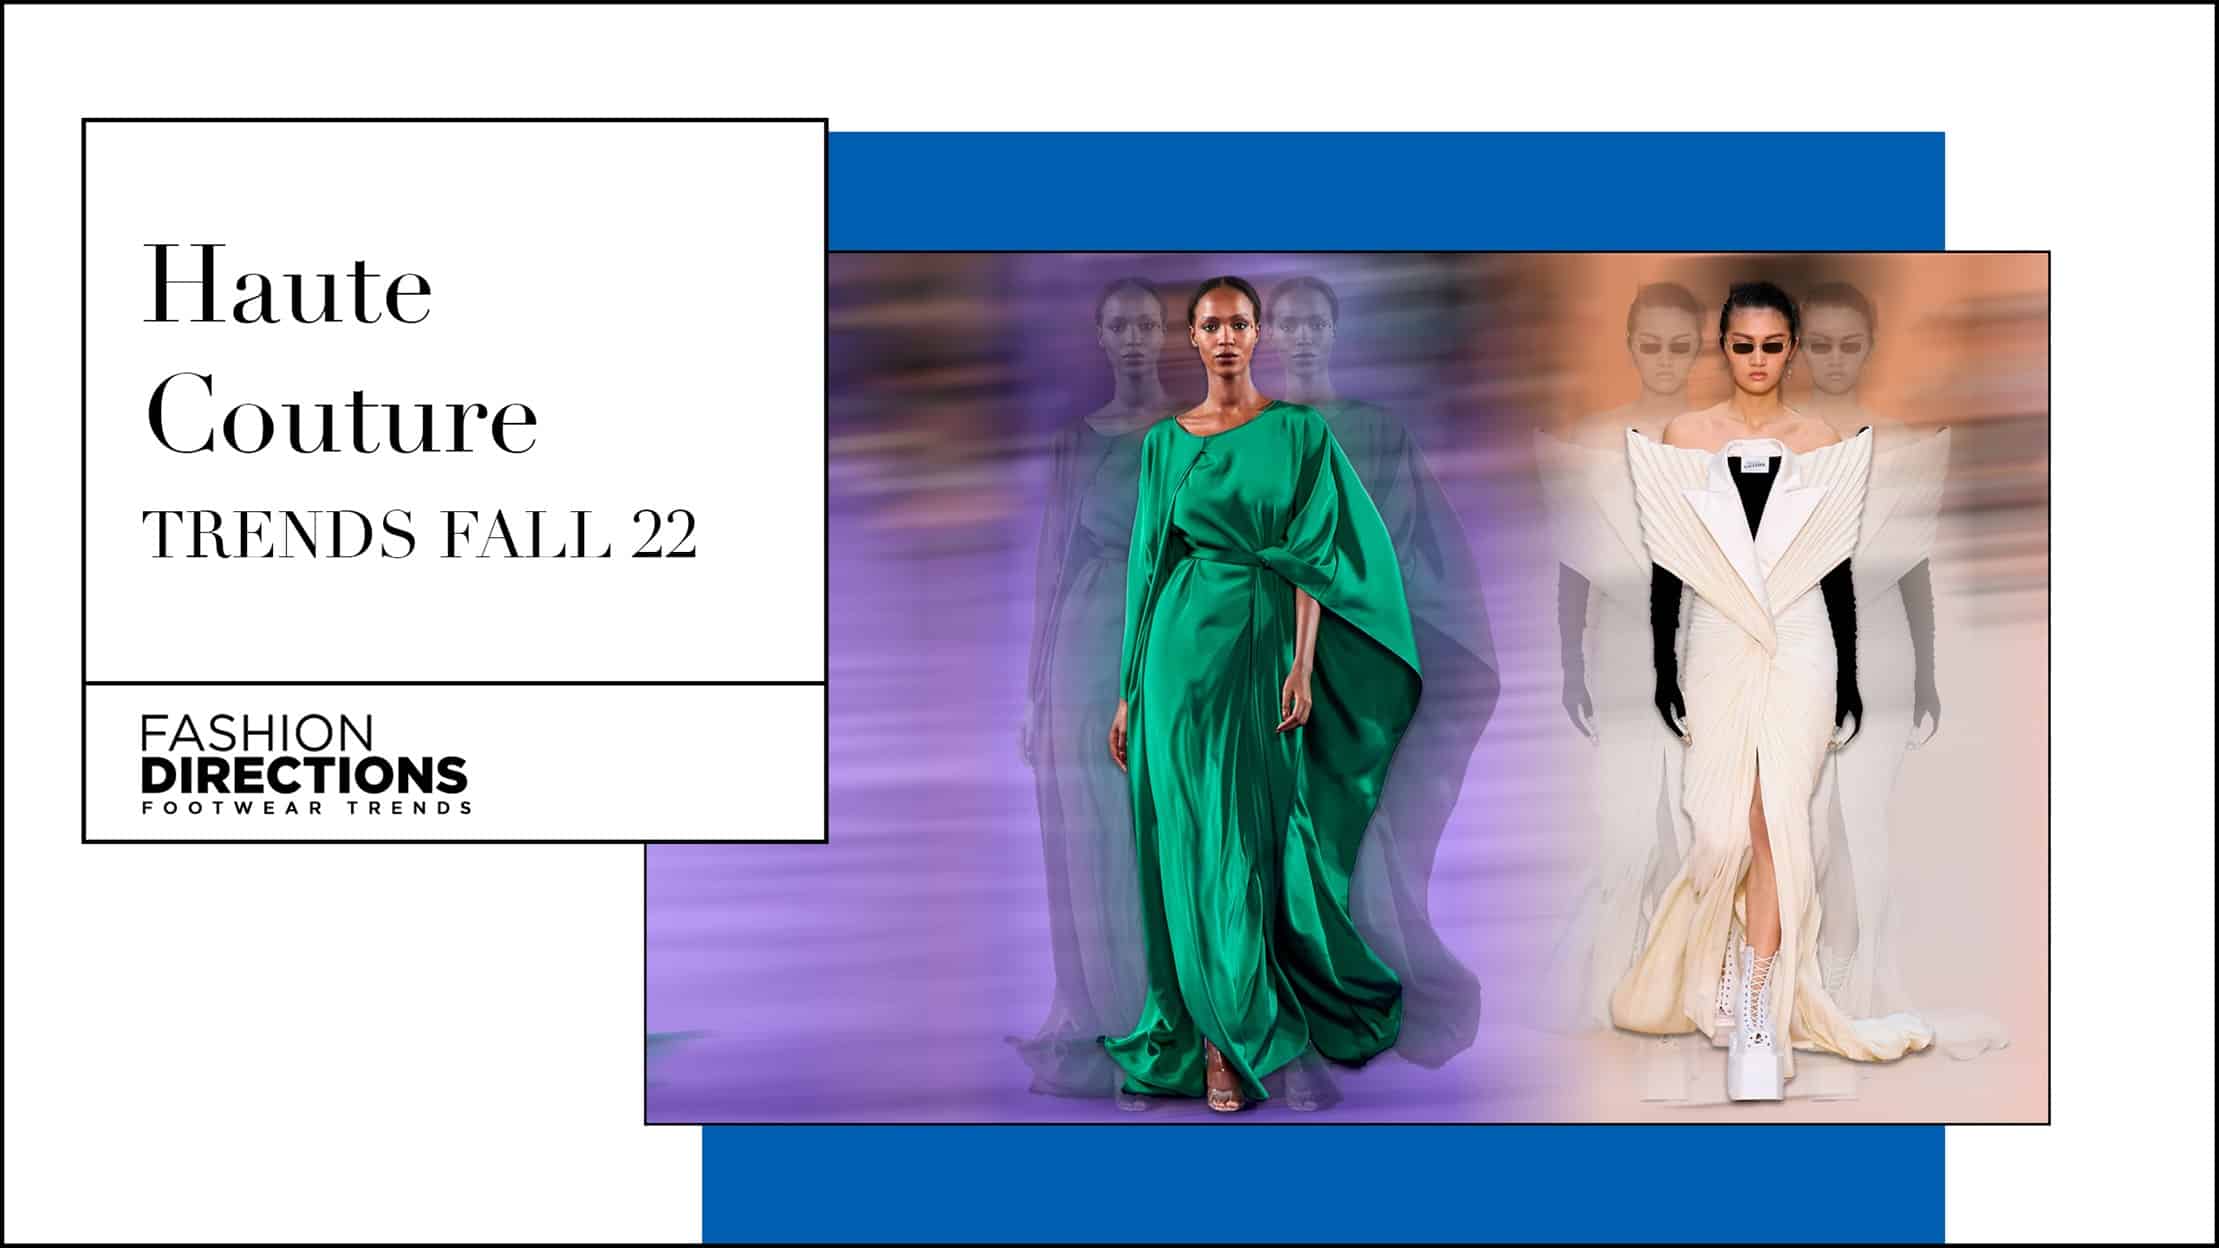 HAUTE COUTURE TRENDS FALL 221